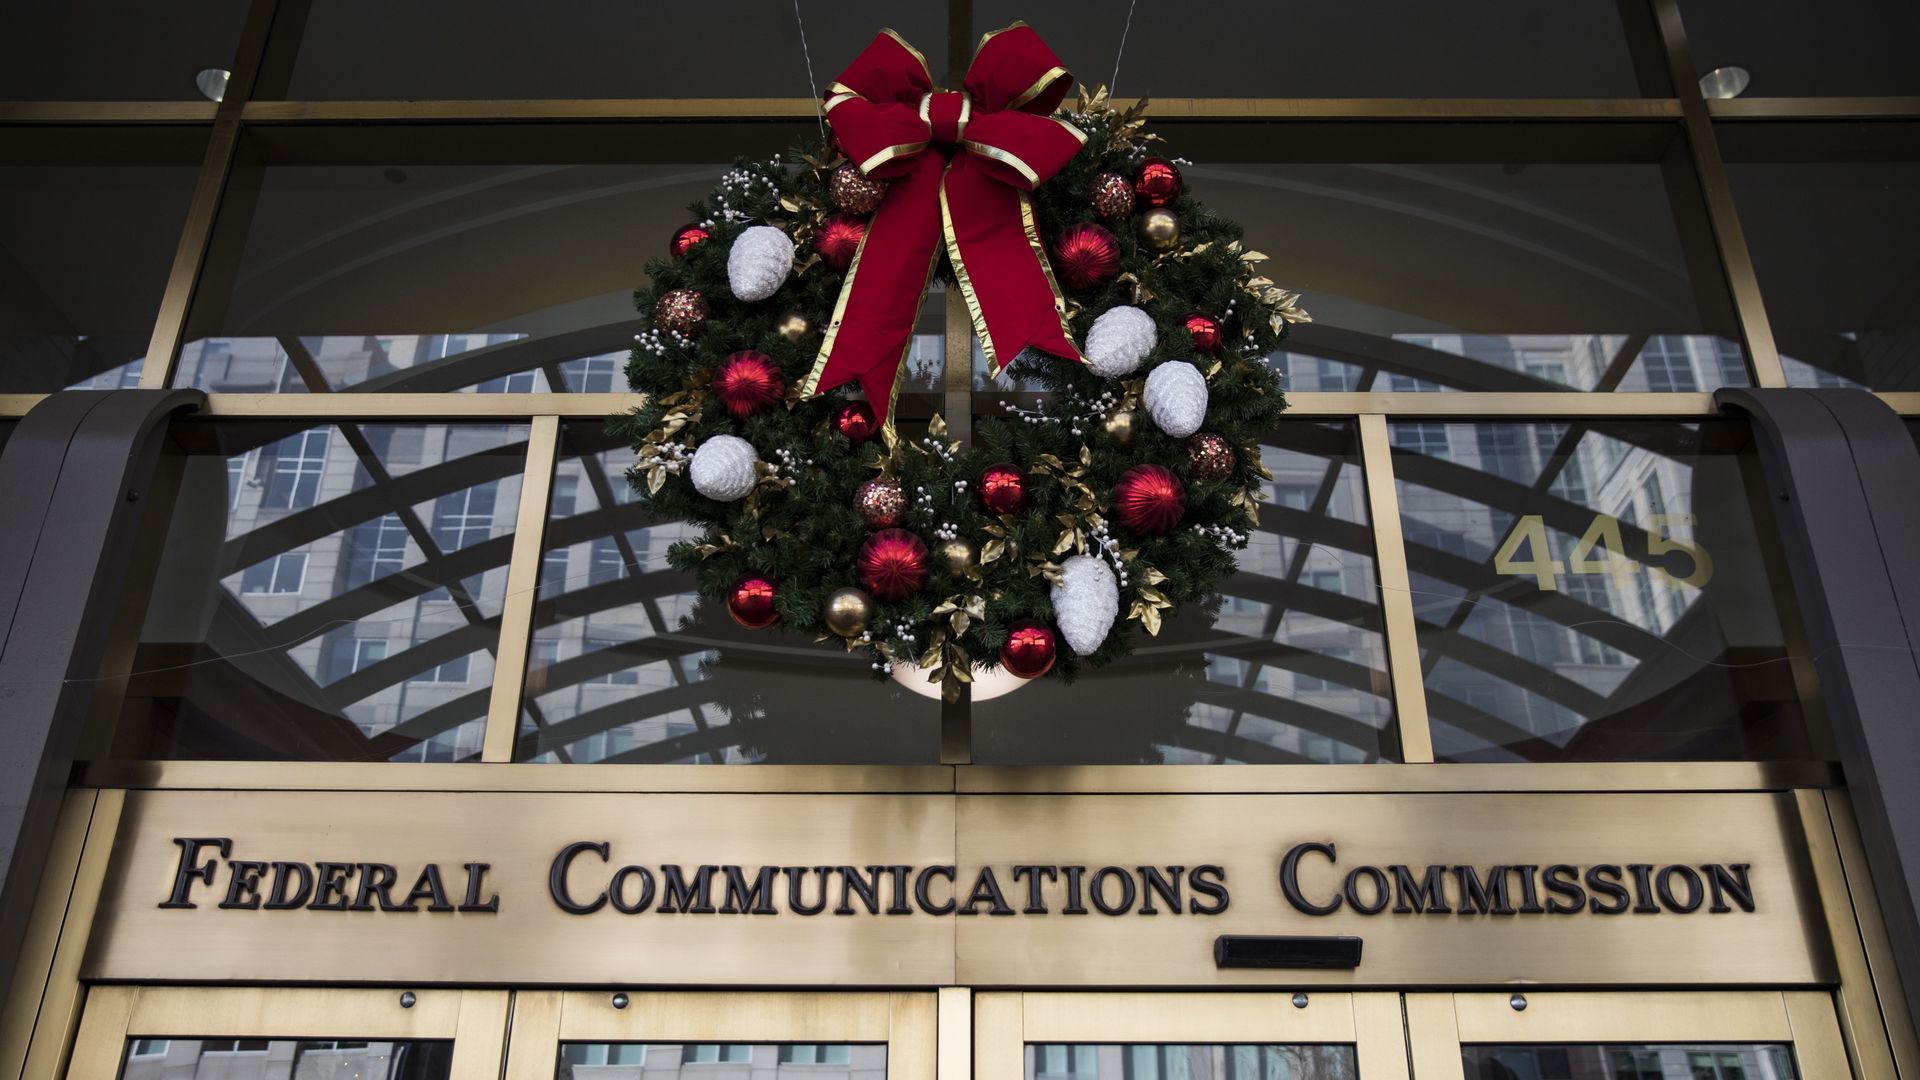 A photo of the entrance to the FCC's former headquarters, with a Christmas wreath hanging over the door